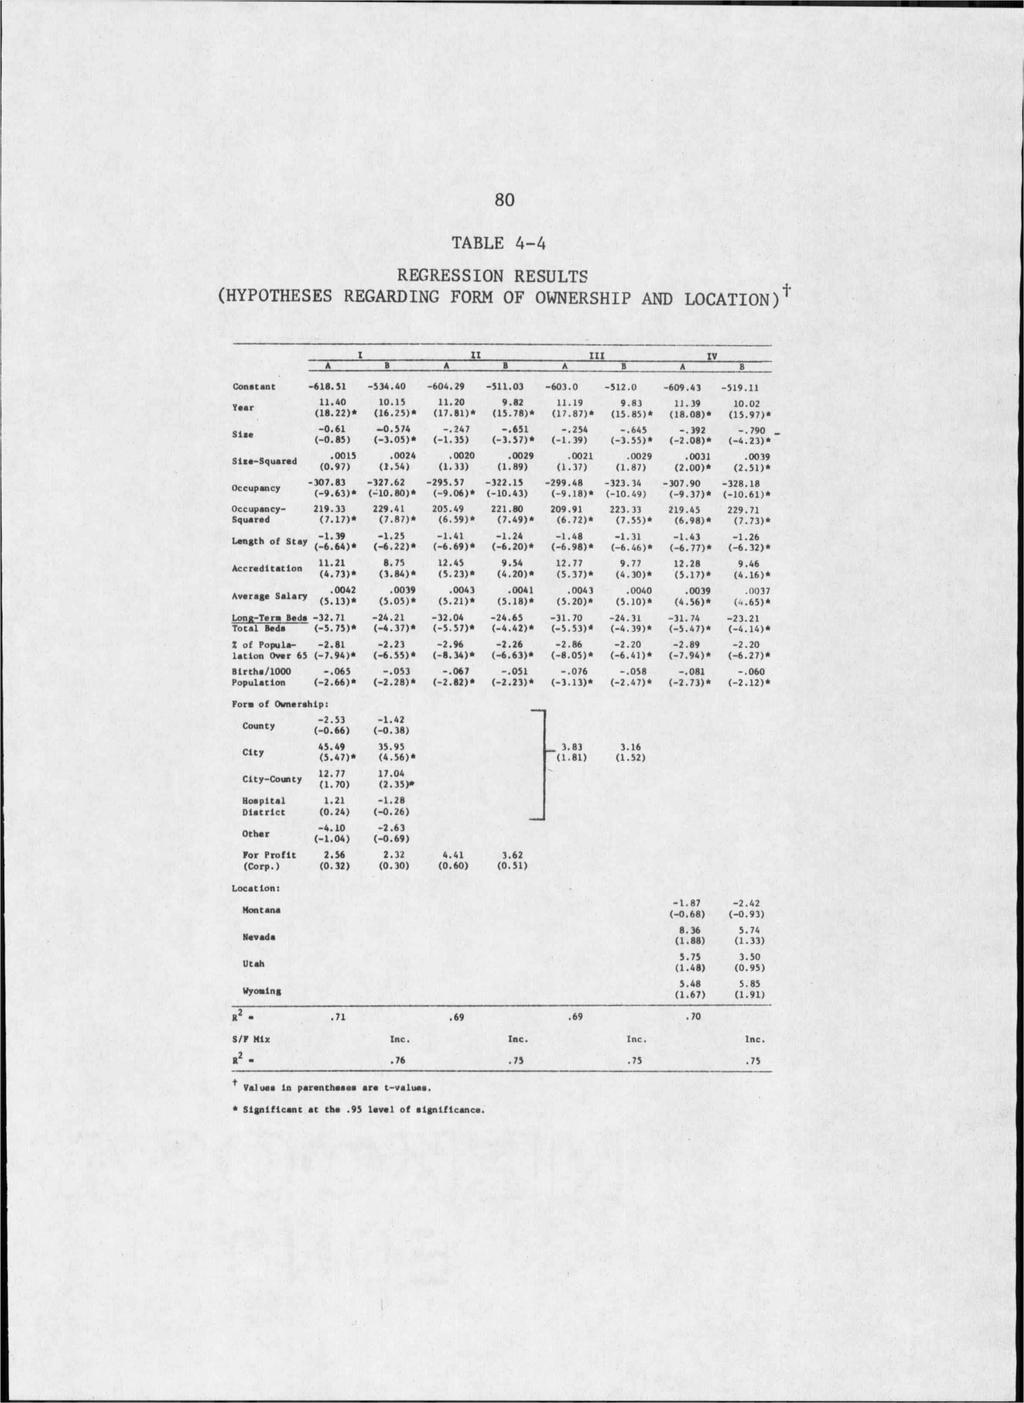 80 TABLE 4-4 REGRESSION RESULTS (HYPOTHESES REGARDING FORM OF OWNERSHIP AND LOCATION)1 I II III IV A B A B A B A B Constant -618.51-534.40-604.29-511.03-603.0-512.0-609.43-519.